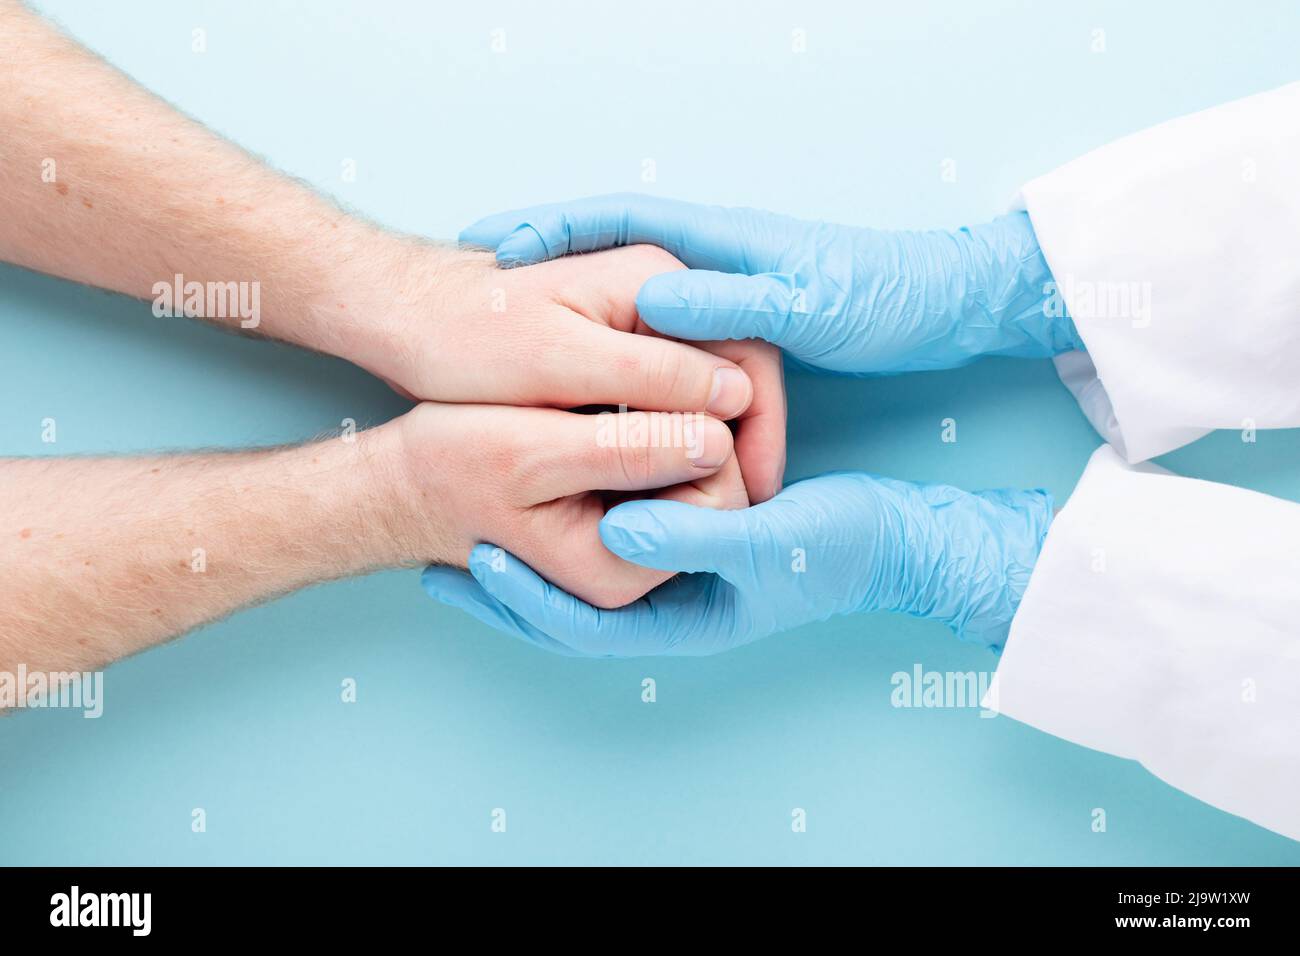 Doctor's hands in medical gloves holding man's hands. Stock Photo